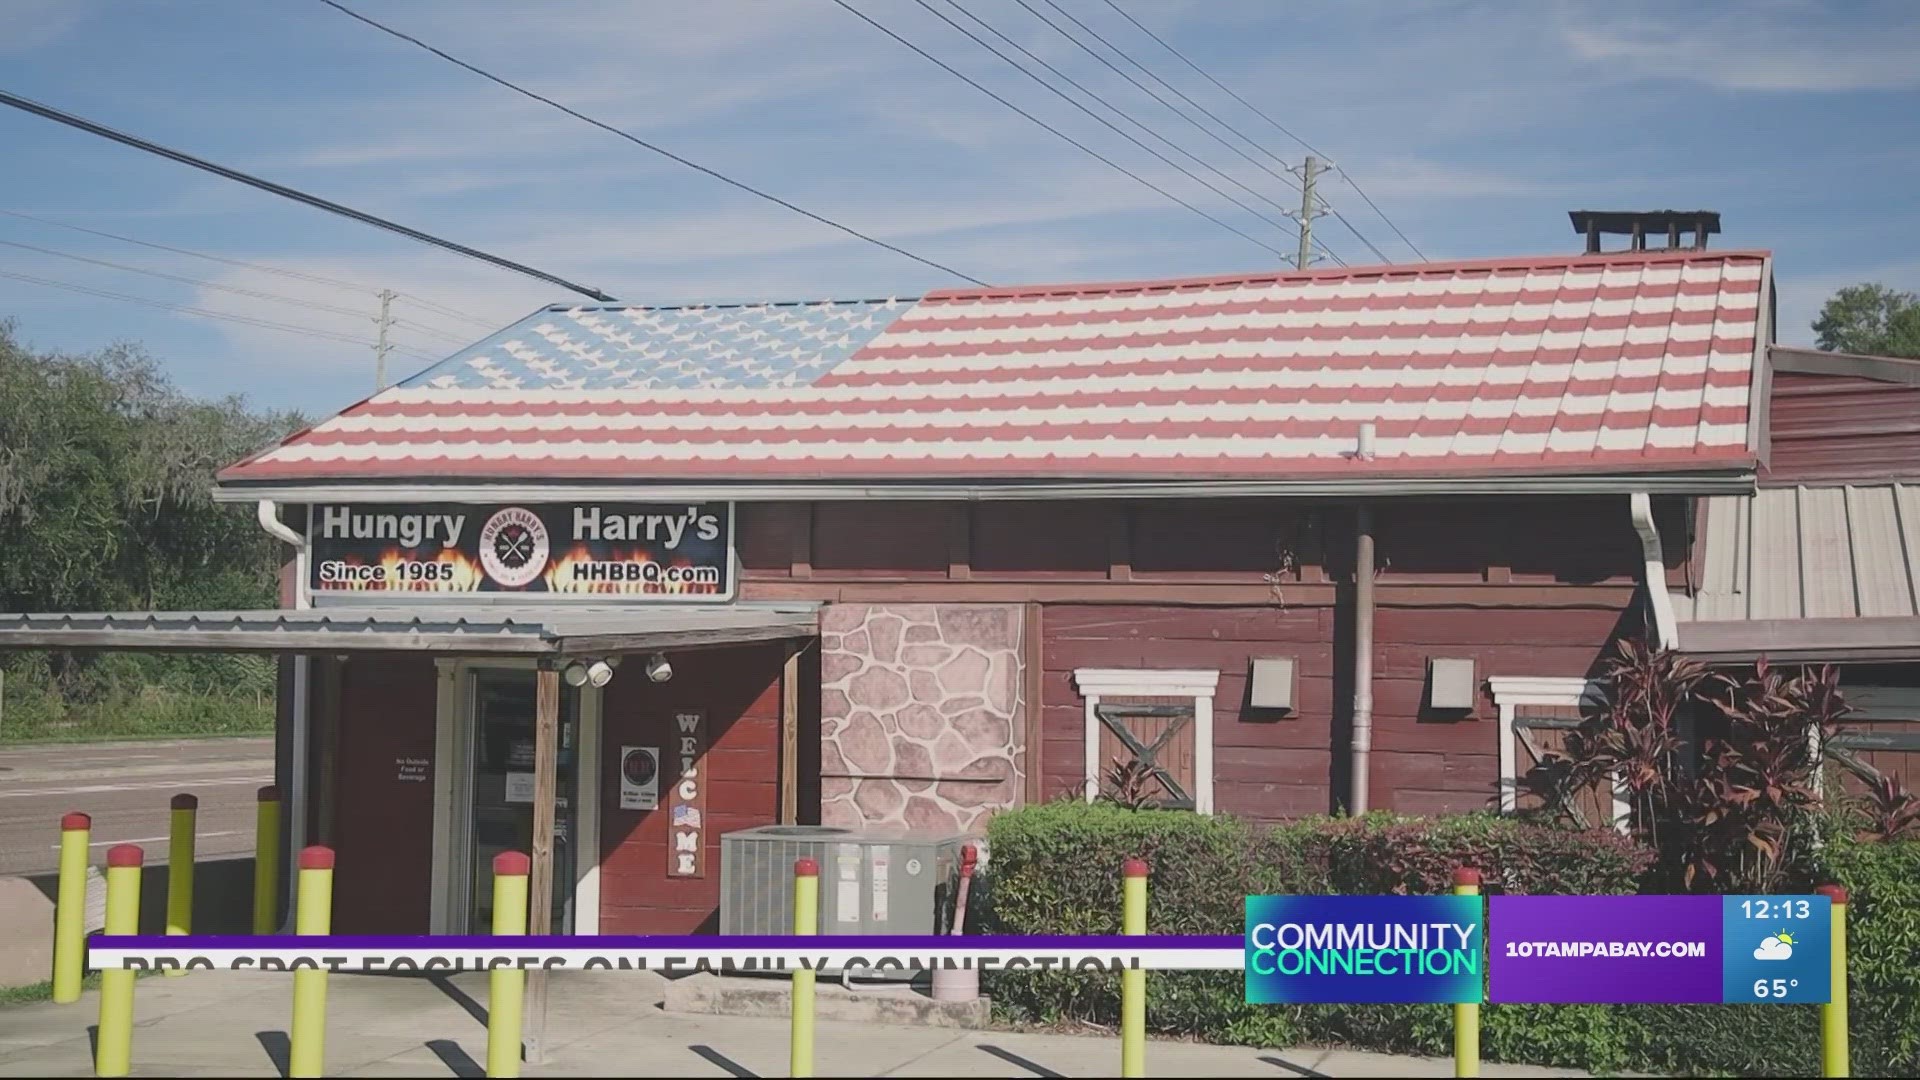 Next year, Hungry Harry's Famous BBQ will celebrate its 40th year being in business.